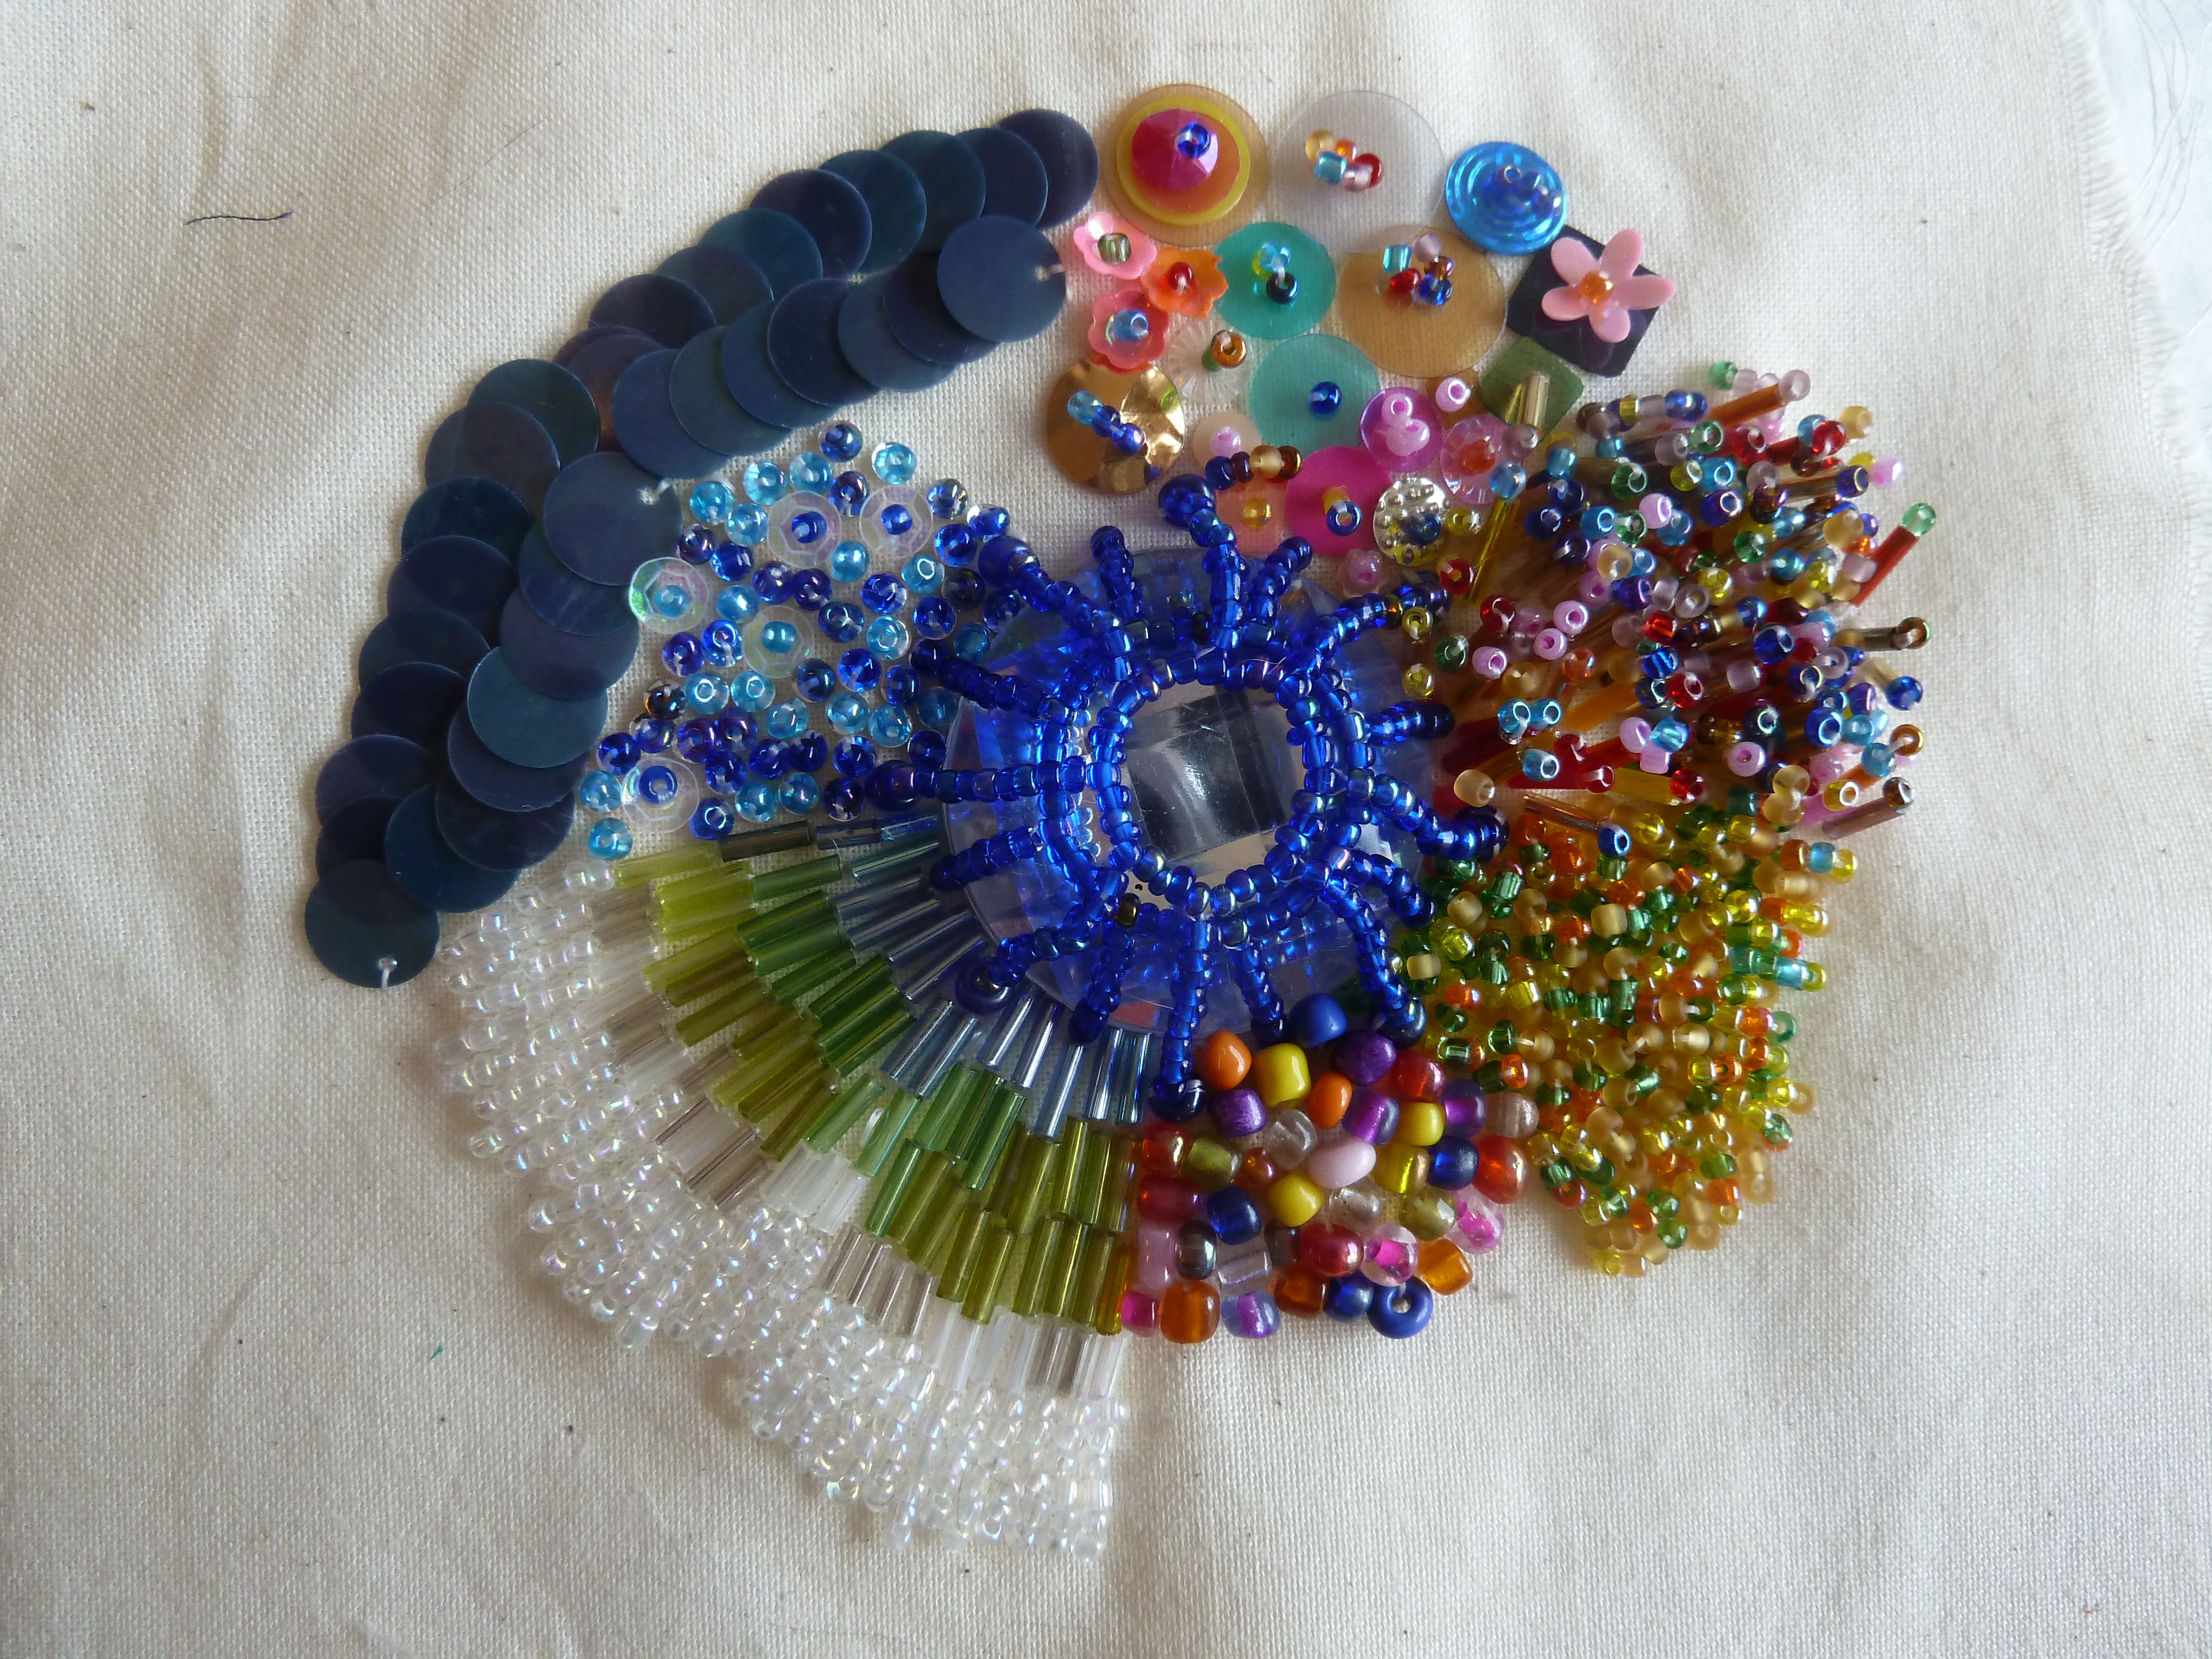 Hand Beading and Embellishment Course – Morley College 18th May 2013 | Gauhar Purdy